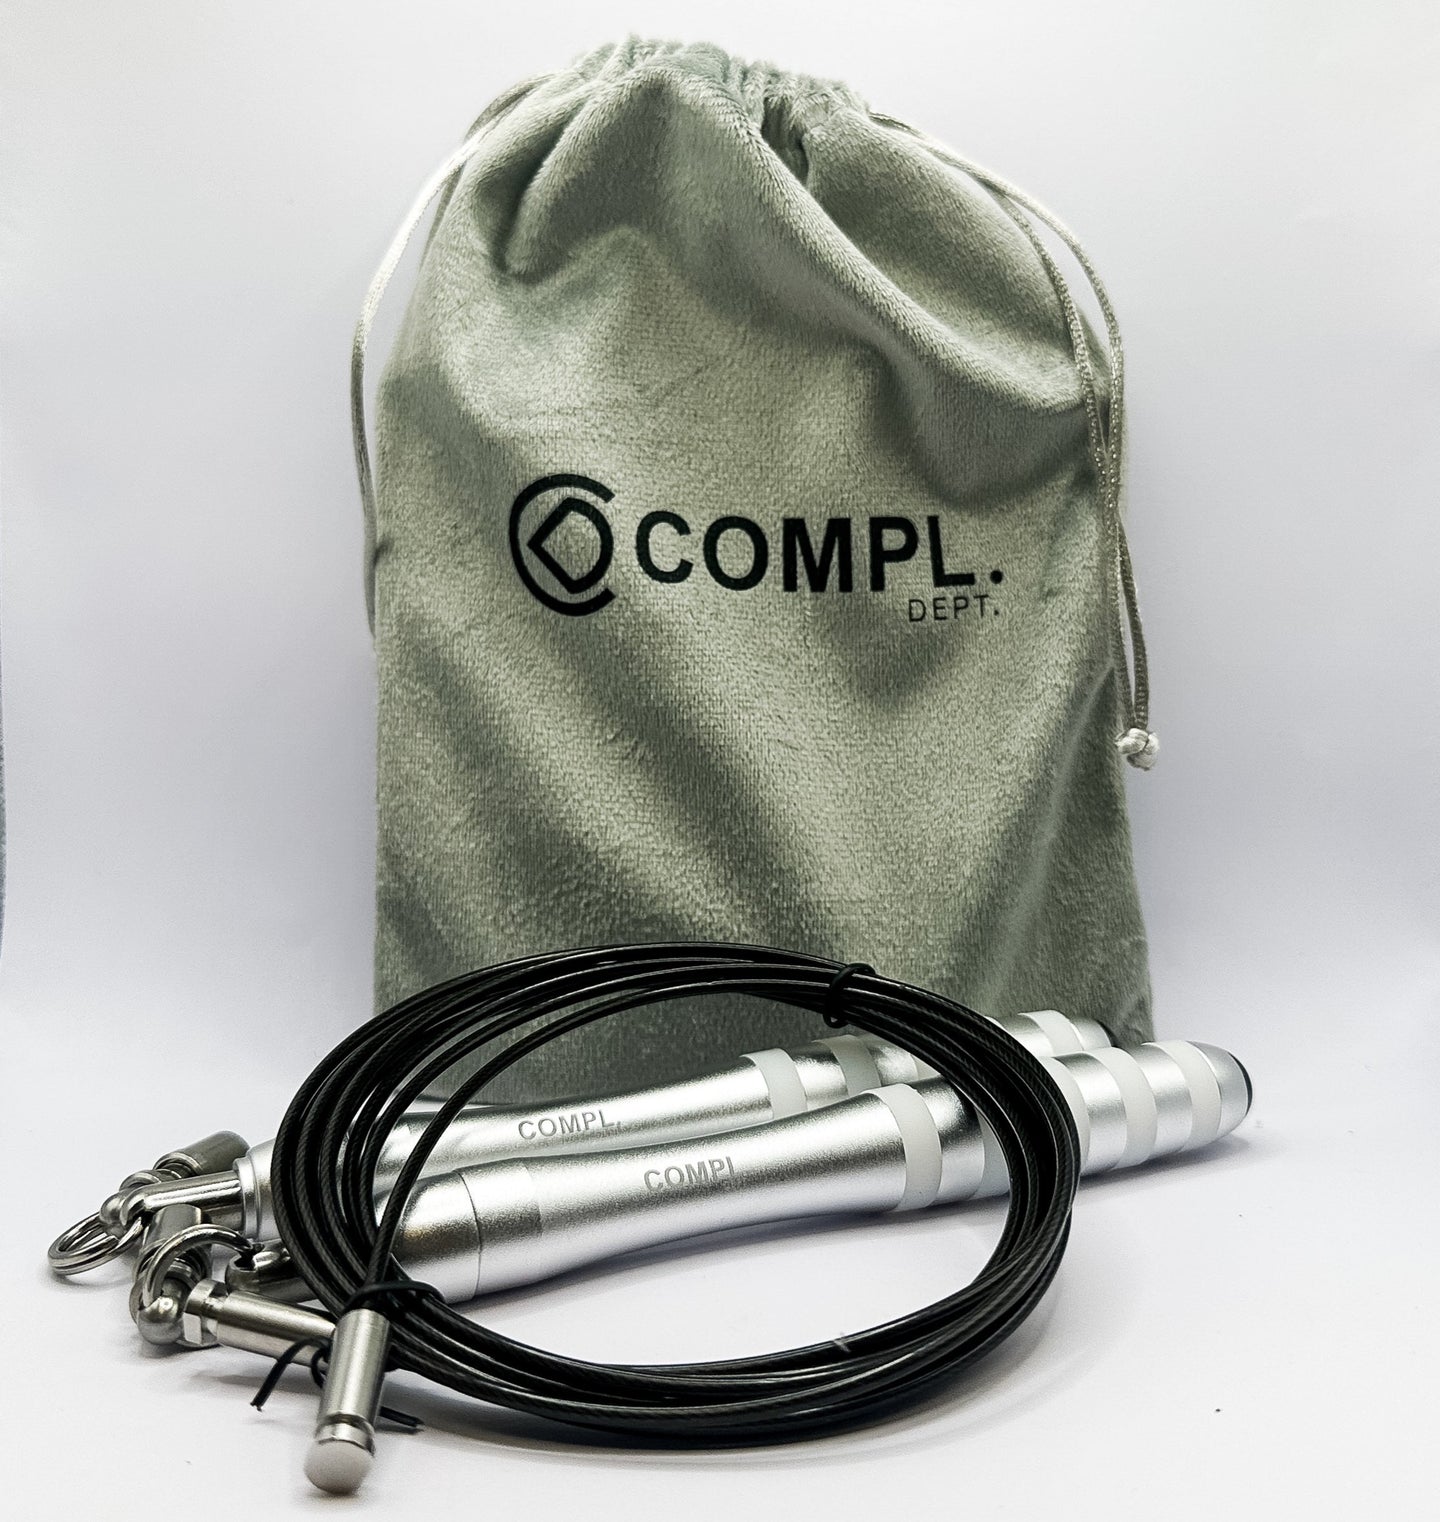 Whine Whip Jump Rope - PVC Rope